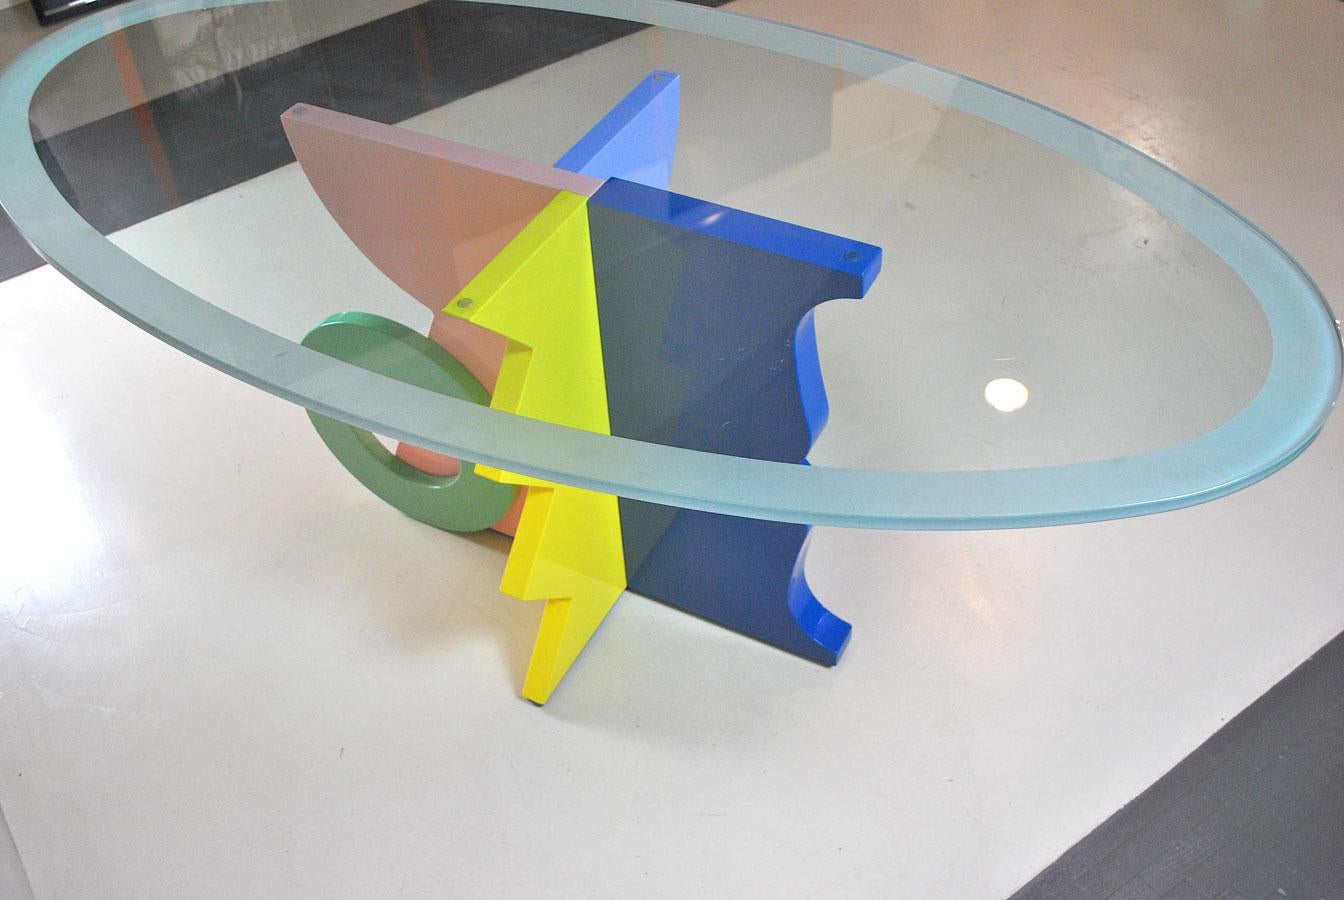 Table in multi-color lacquered wood with a smoked glass on top by Alessandro Mendini one of the most important designer of Memphis Milano Studio

Biography

Alessandro Mendini was born in Milan in 1931. After a long experience with Nizzoli